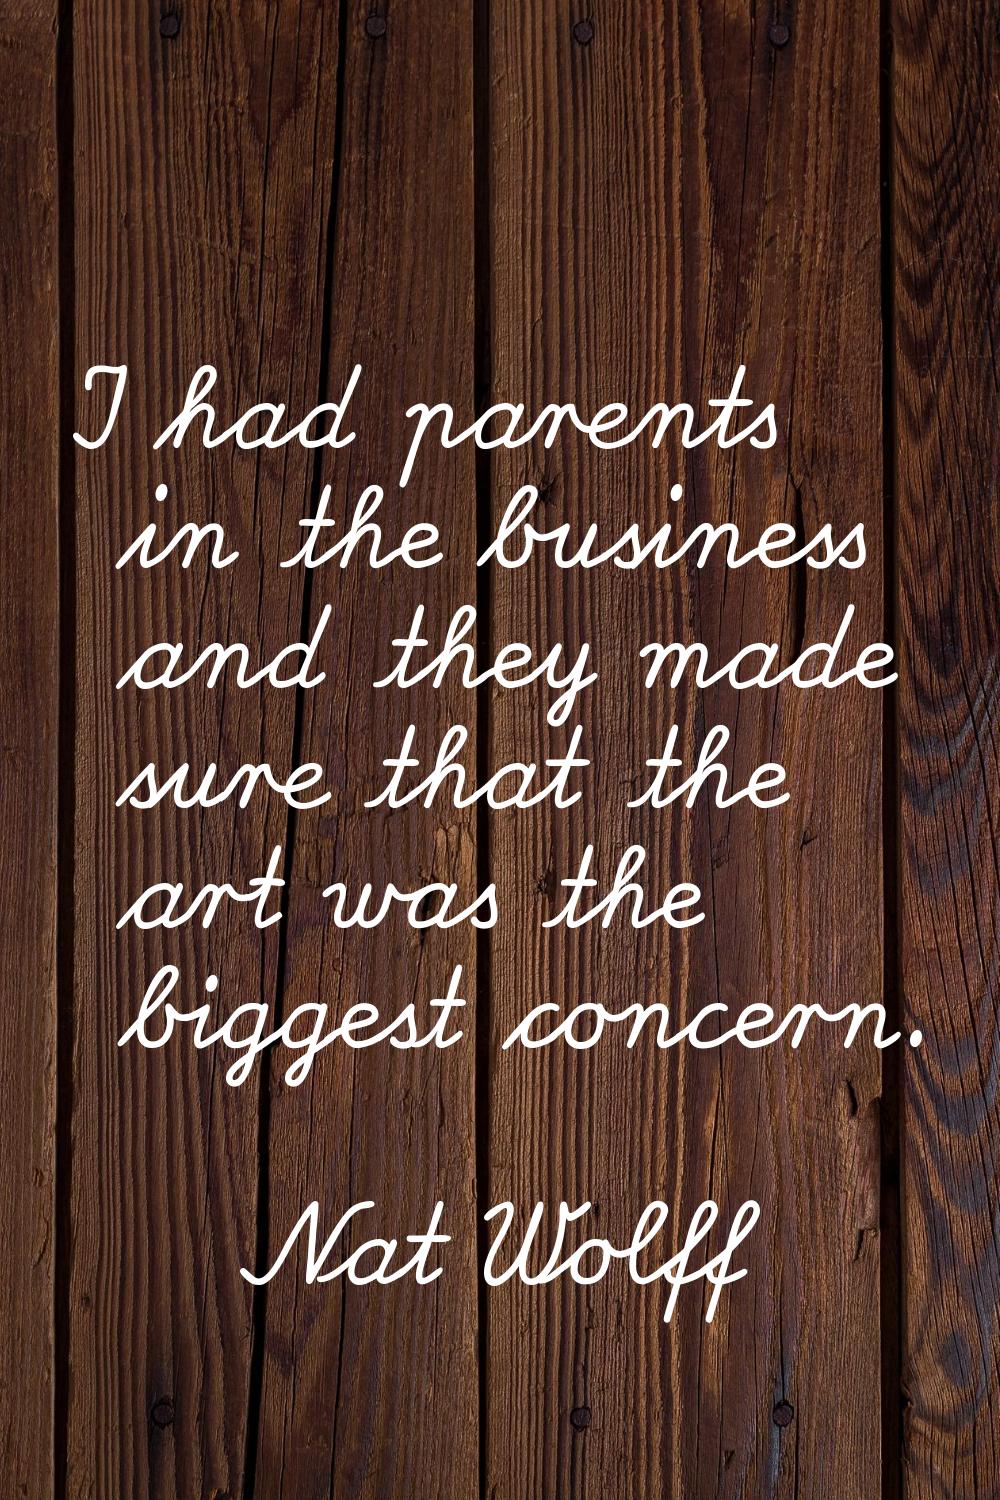 I had parents in the business and they made sure that the art was the biggest concern.